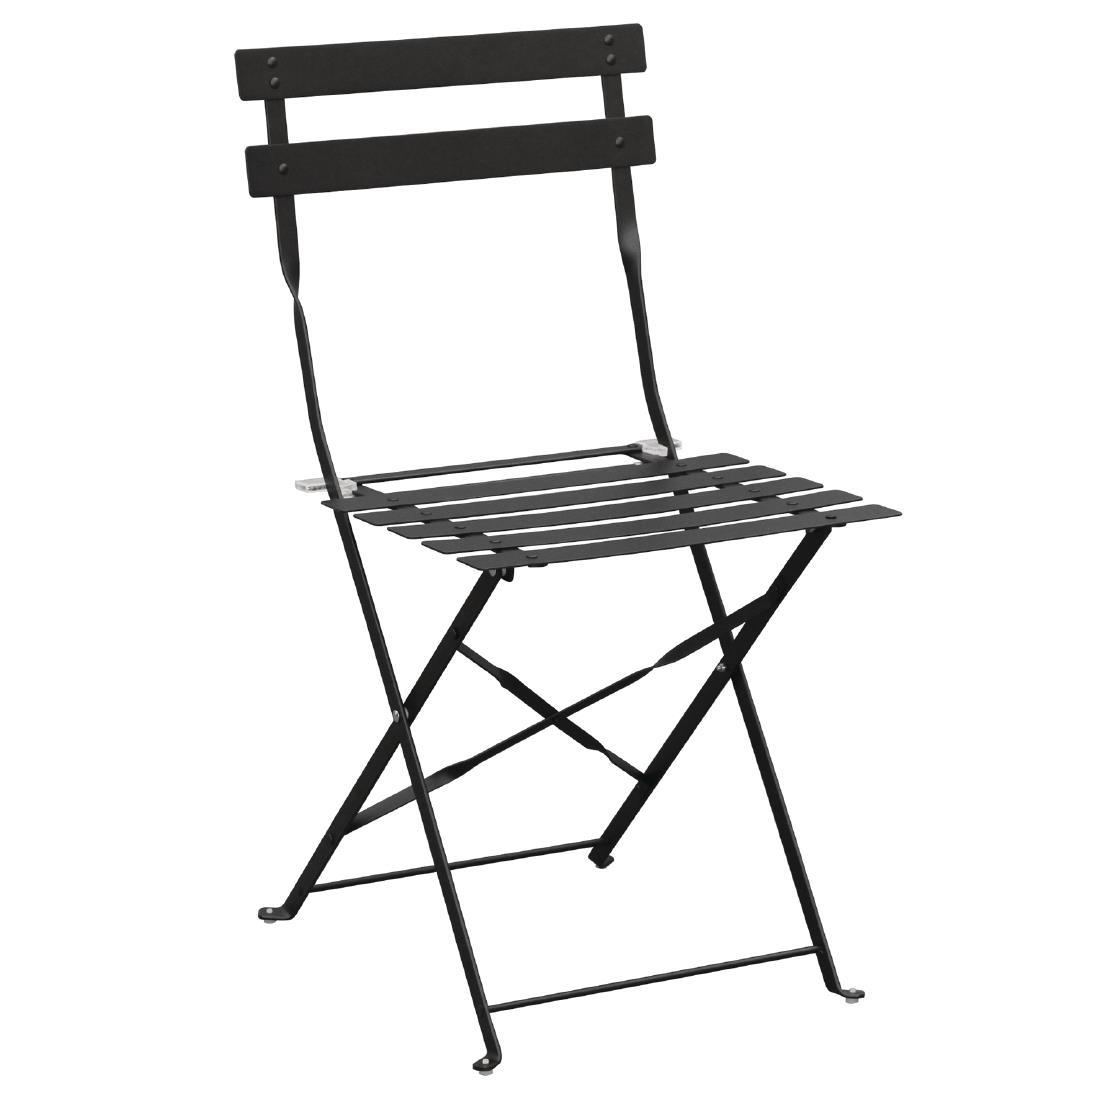 Bolero Black Pavement Style Steel Chairs (Pack of 2) - GH553  - 1